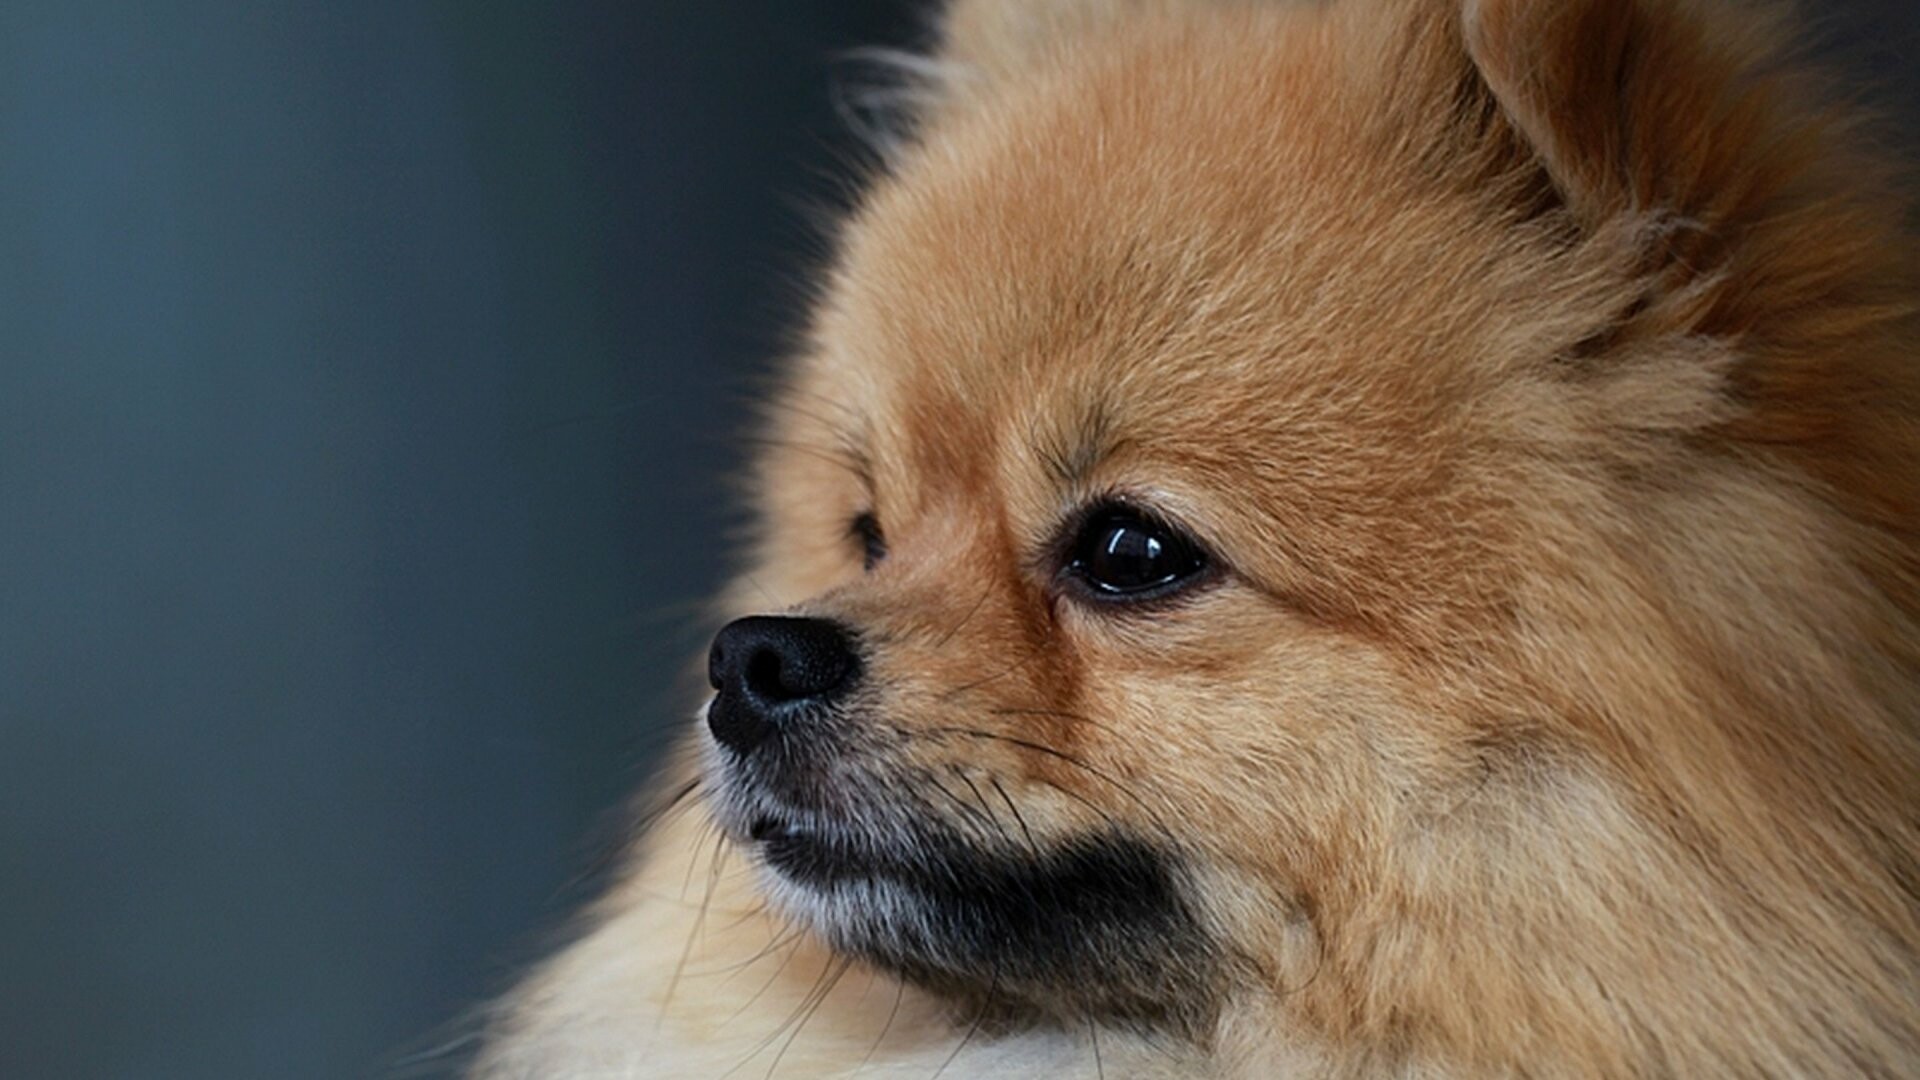 Pomeranian: Classed as a toy dog breed because of its small size. 1920x1080 Full HD Background.